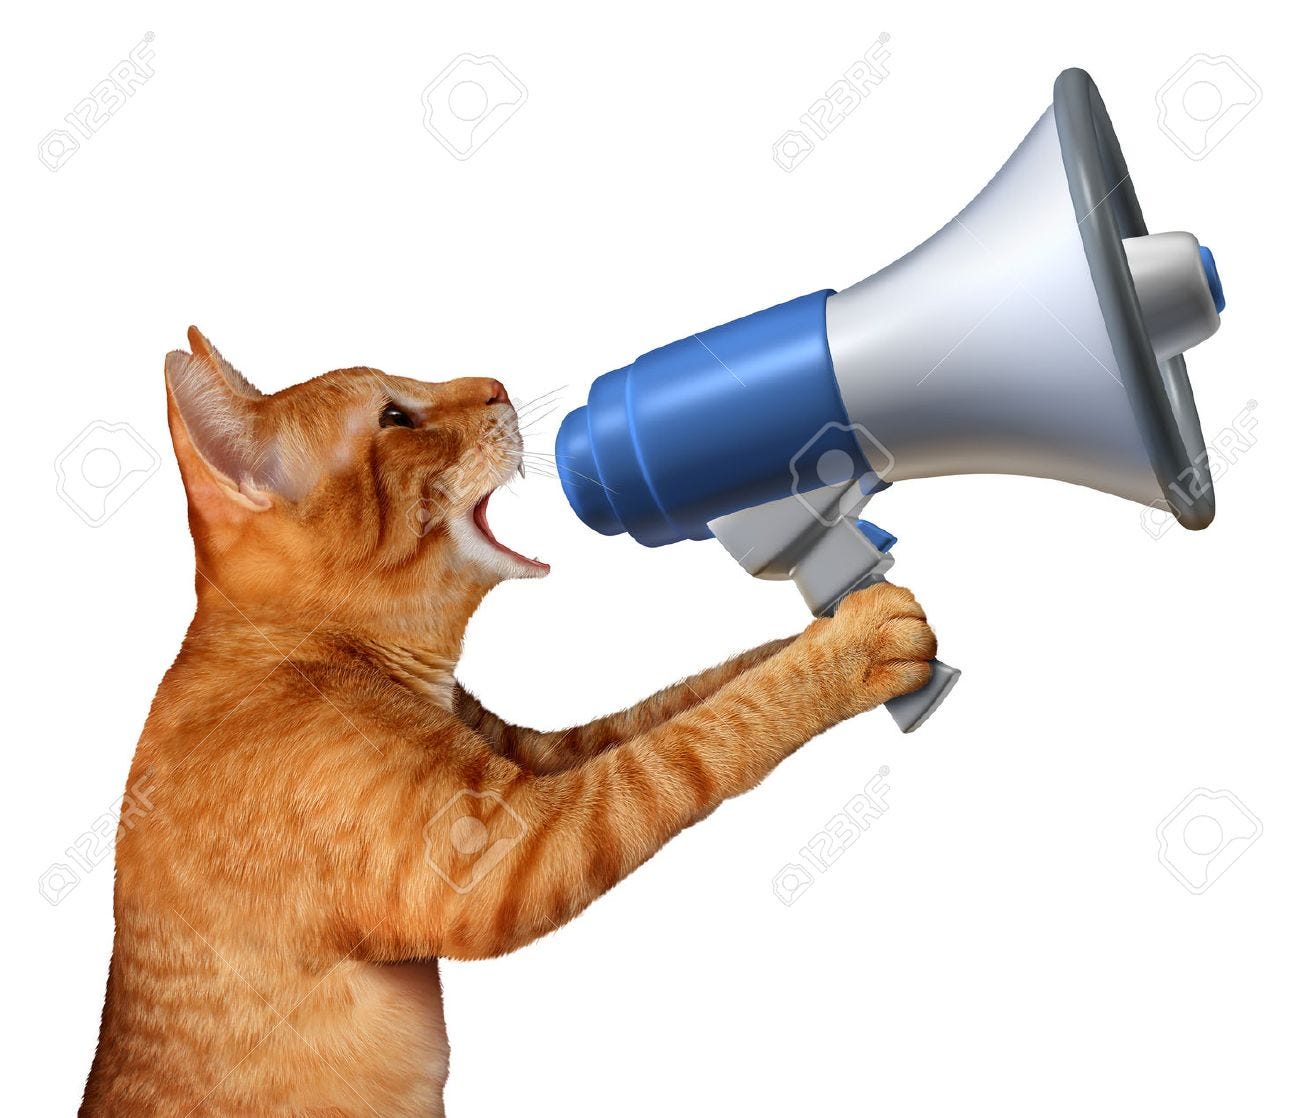 Cat Announcement Concept As A Generic Feline Holding A Bullhorn Or Megaphone  To Announce News Or Promote Pet And Veterinary Issues Or Animal Marketing  And Promotion Isolated On A White Background. Stock